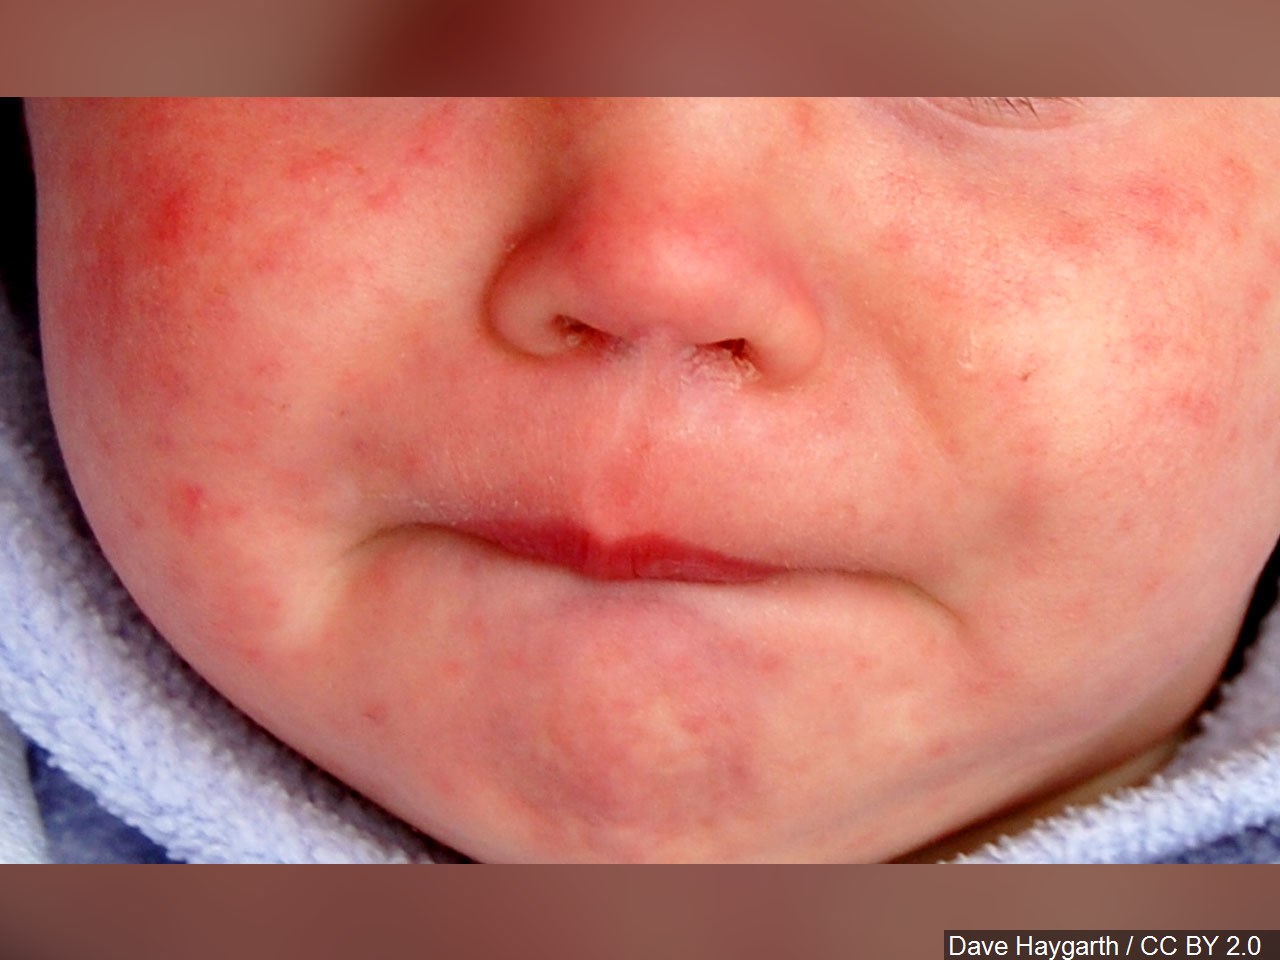 Jefferson County Department of Health is offering a measles vaccine